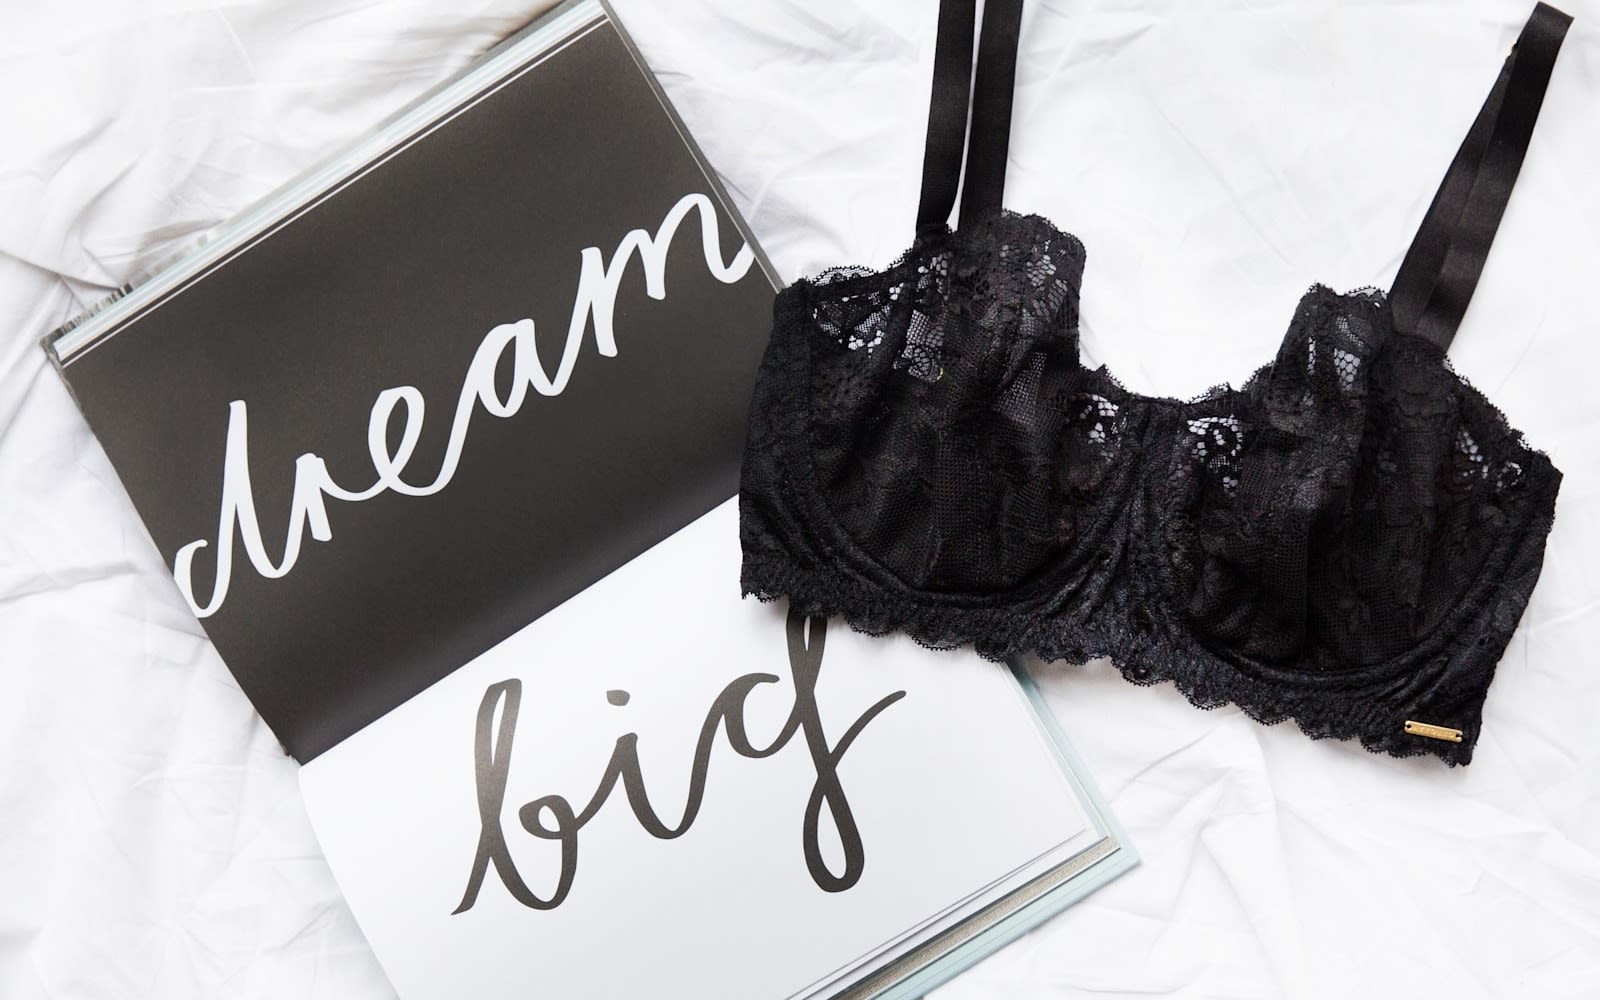 On a white background a book is open to pages that read 'dream big', next to a black bra